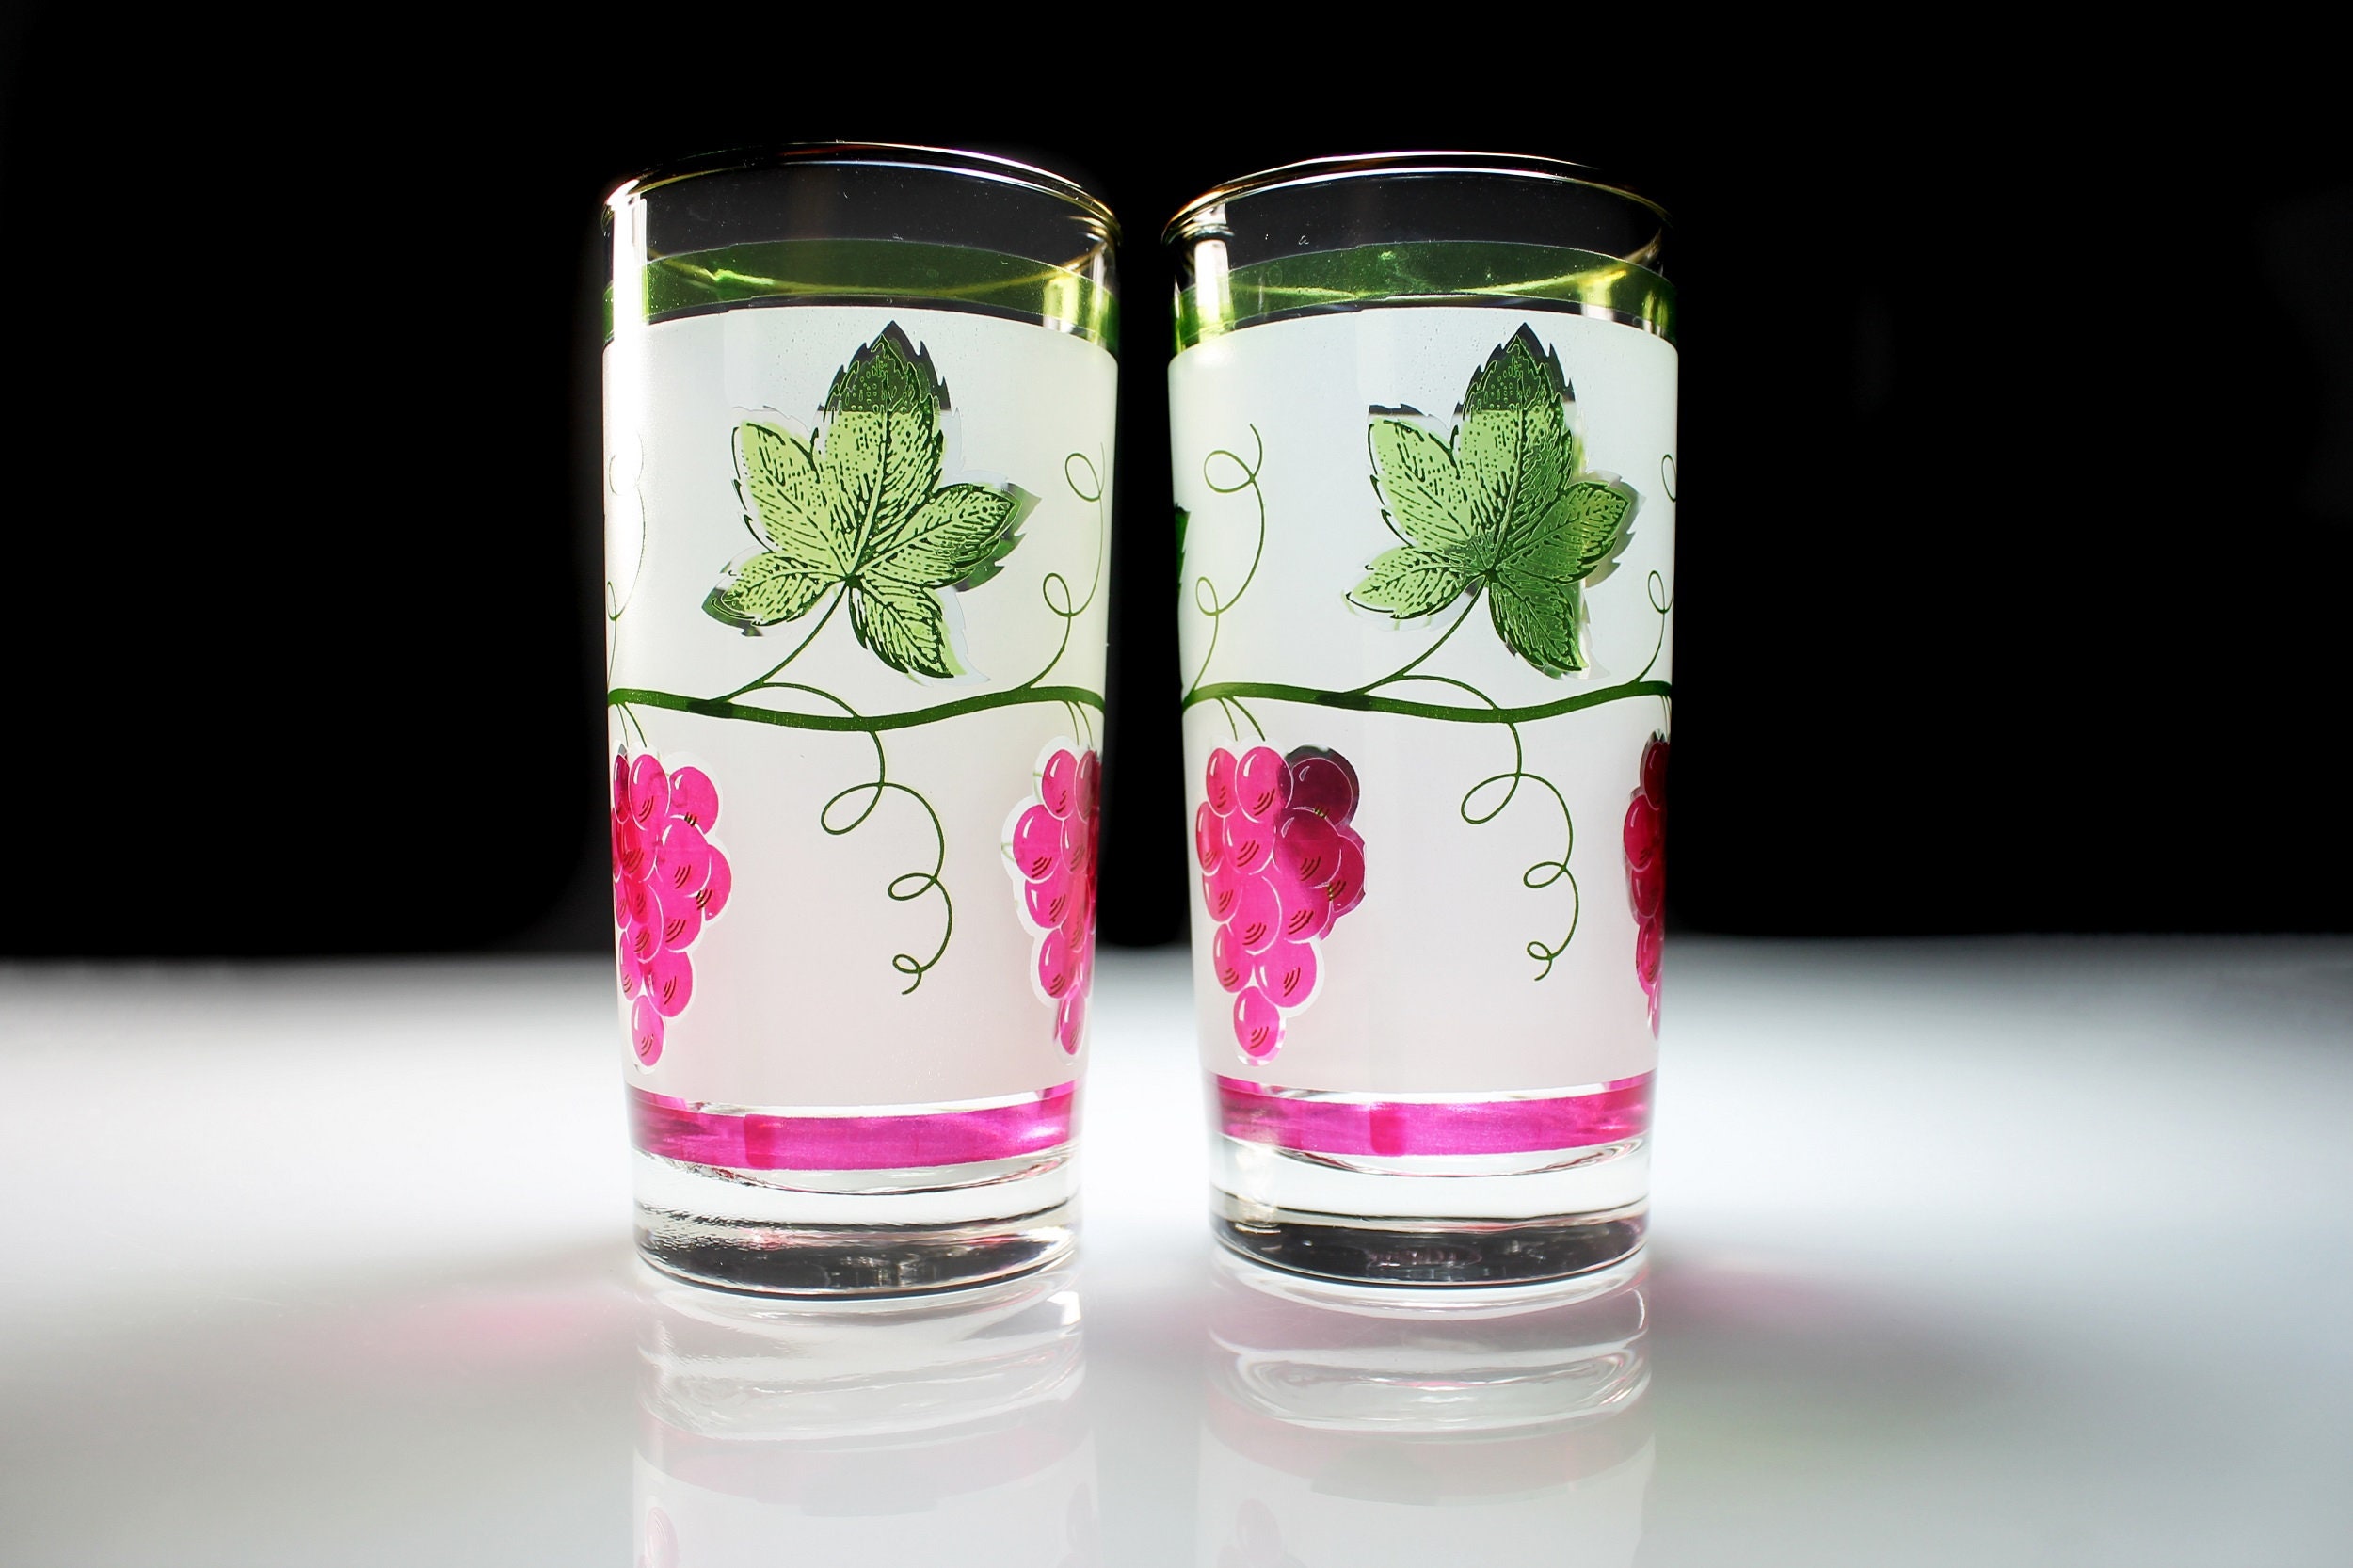 Grapevine Frosted Tumblers, Red Grapes, Green Leaves and Vines